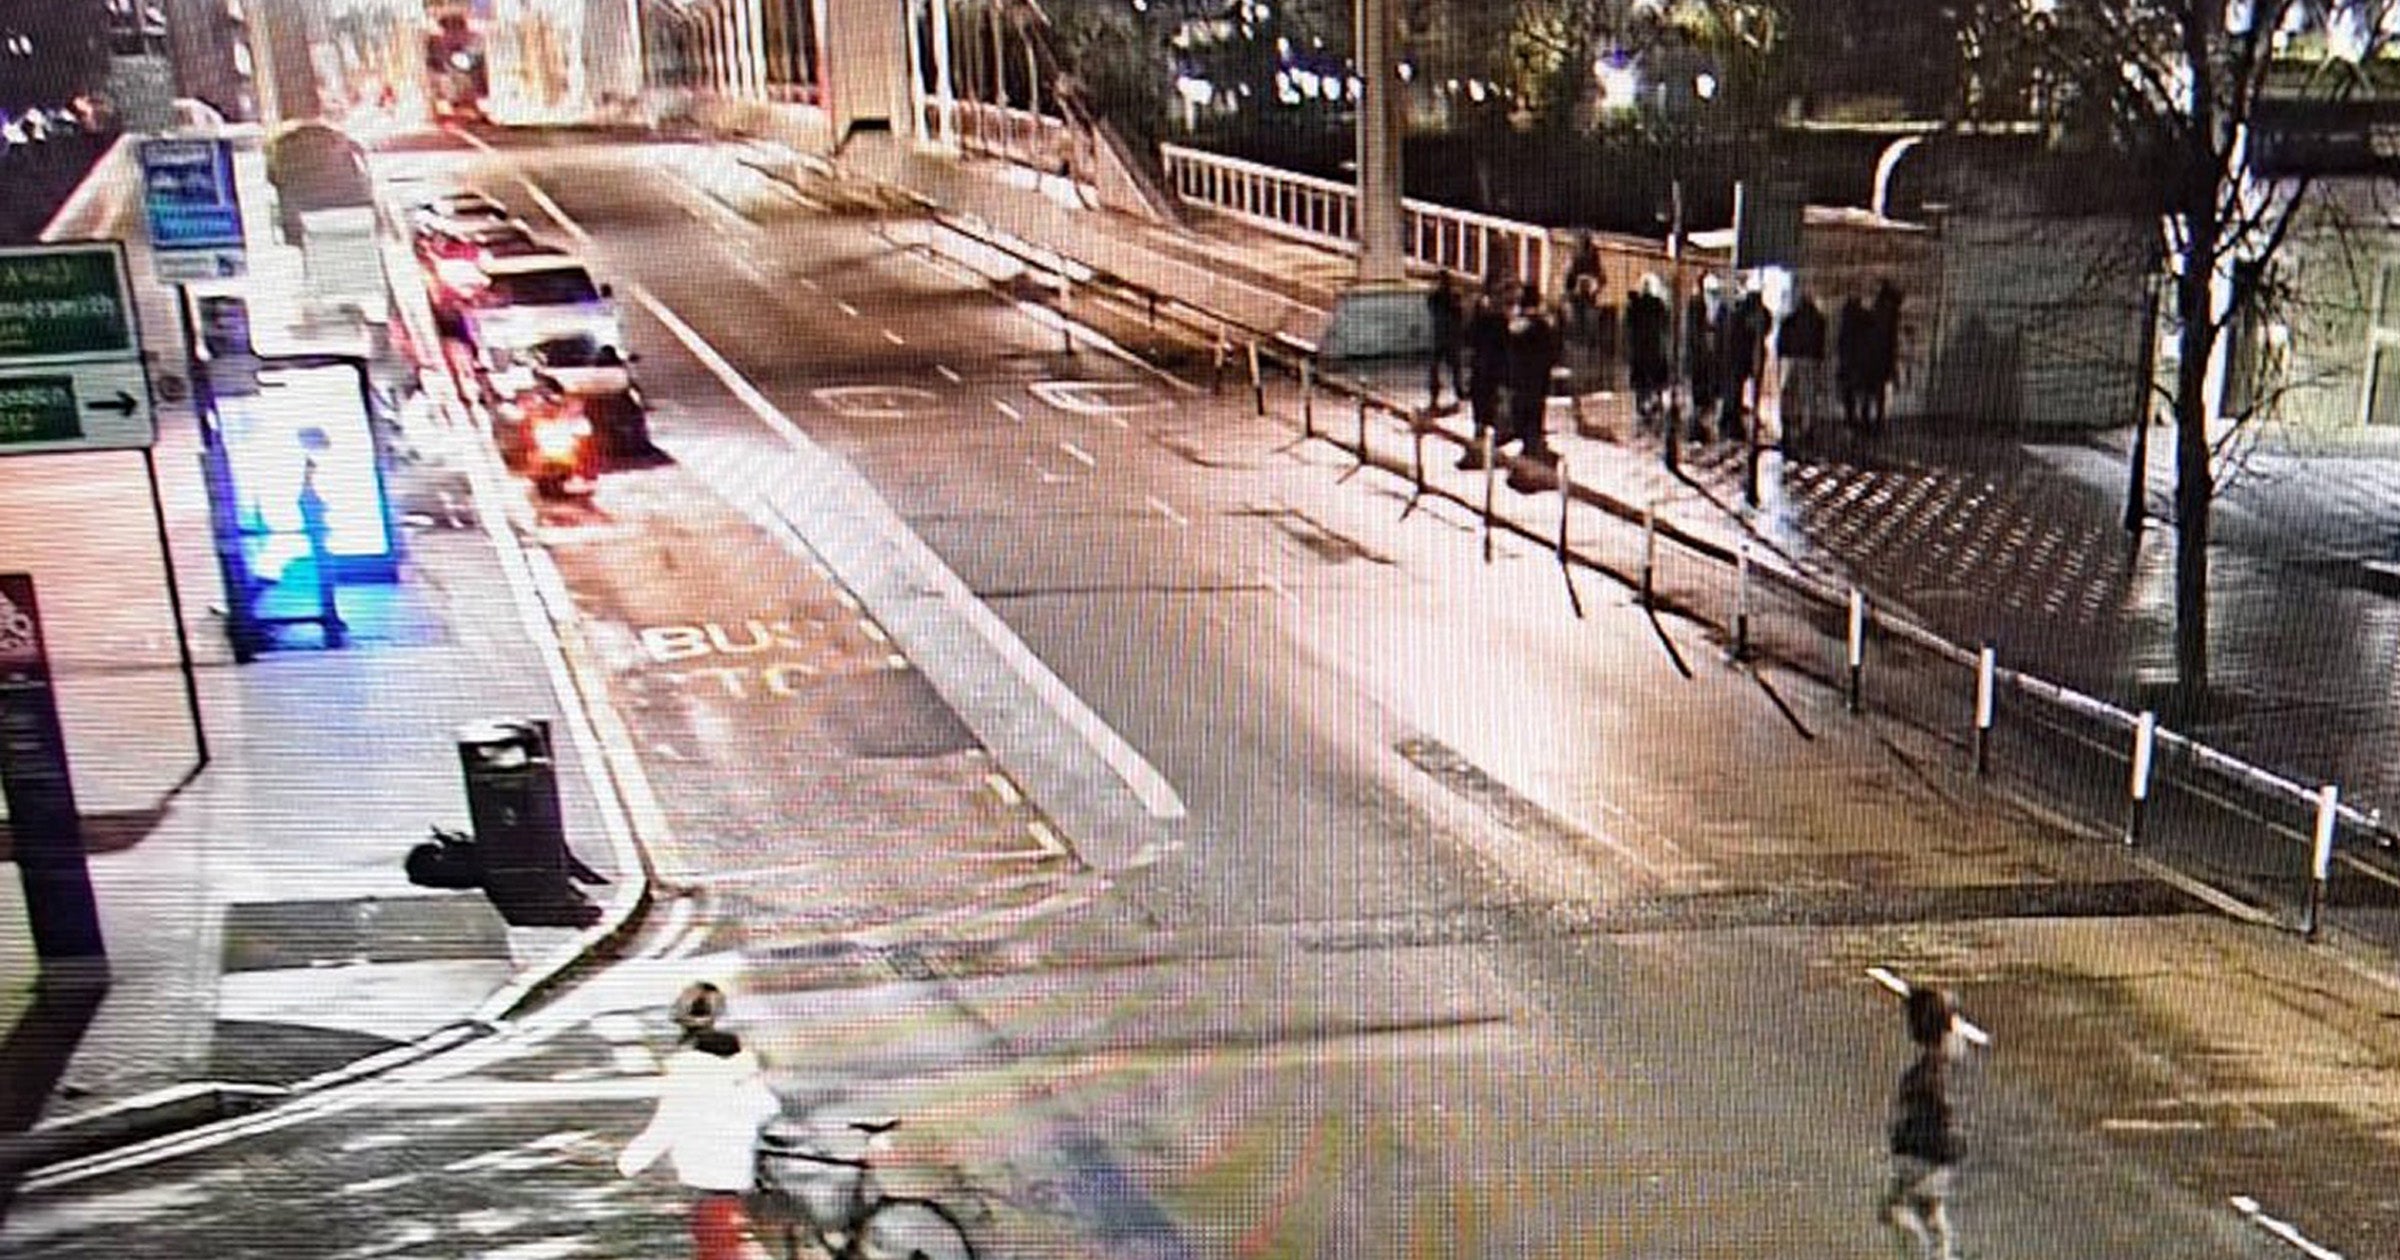 The last know sighting of him was on Chelsea Bridge at 11.25pm